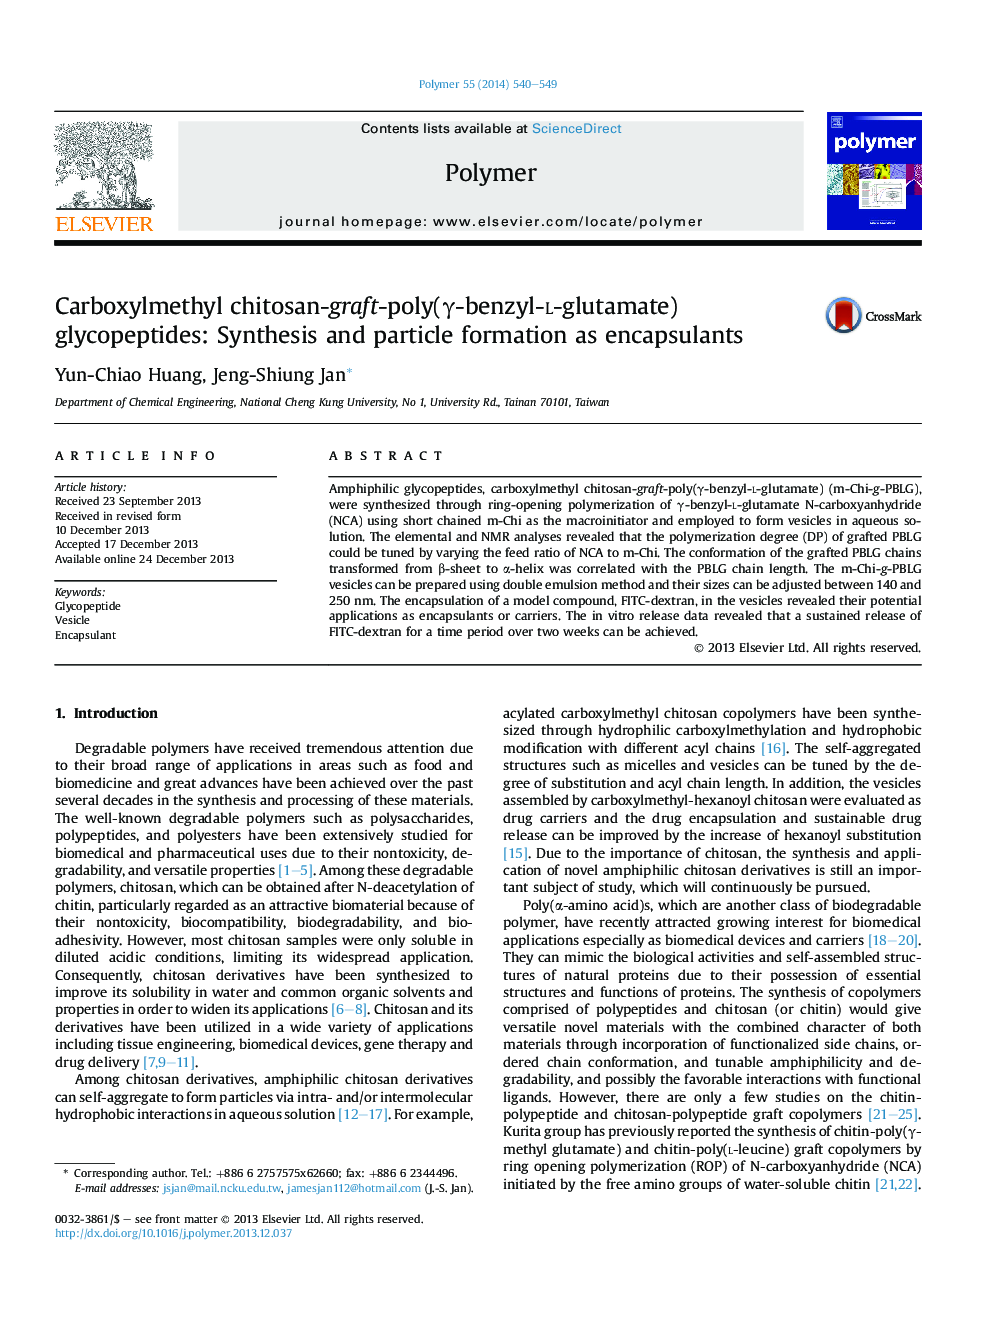 Carboxylmethyl chitosan-graft-poly(Î³-benzyl-l-glutamate) glycopeptides: Synthesis and particle formation as encapsulants